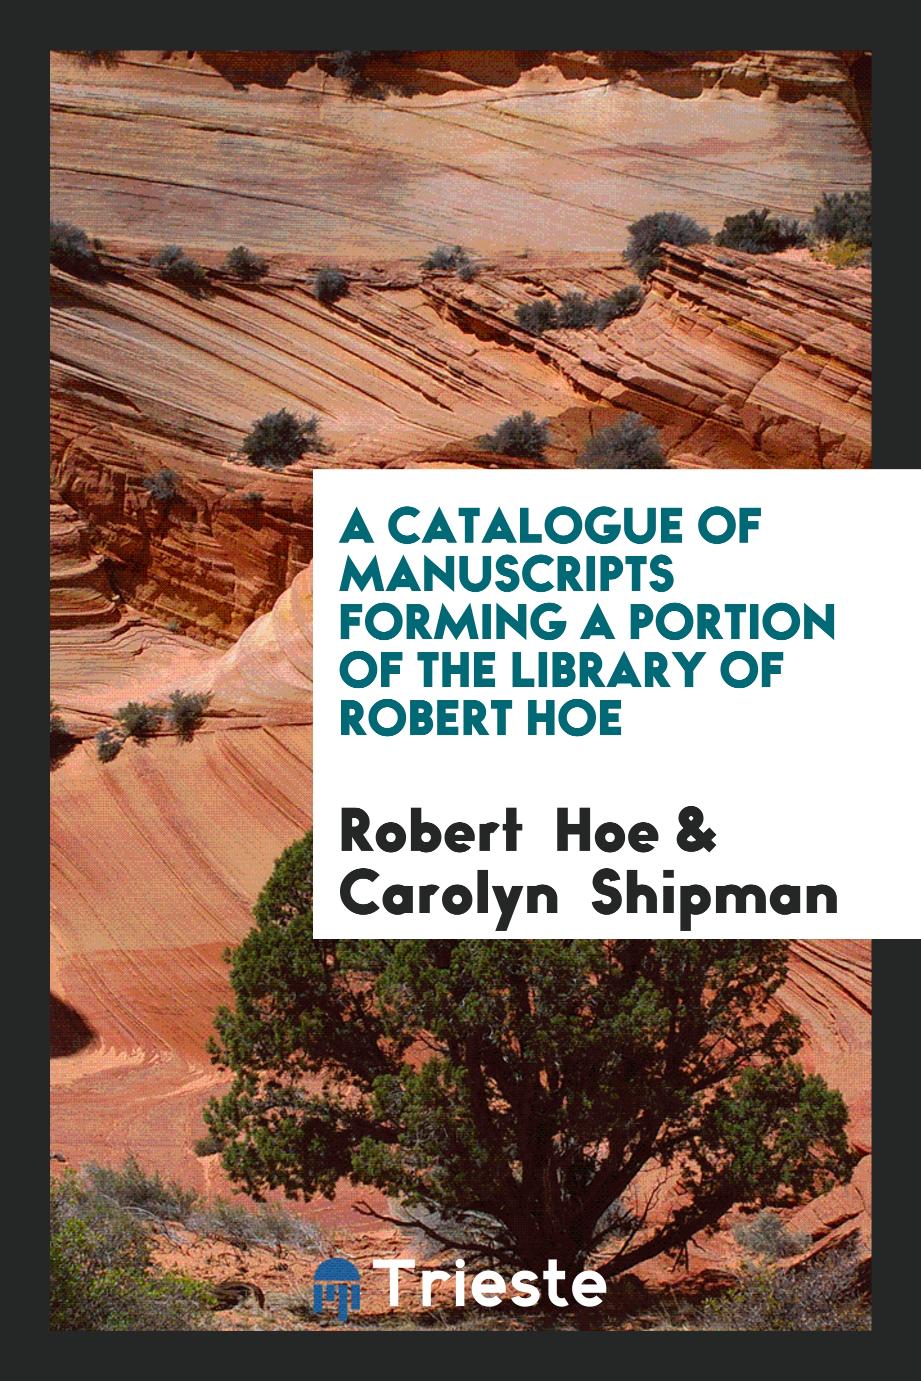 Robert  Hoe, Carolyn Shipman - A Catalogue of Manuscripts Forming a Portion of the Library of Robert Hoe